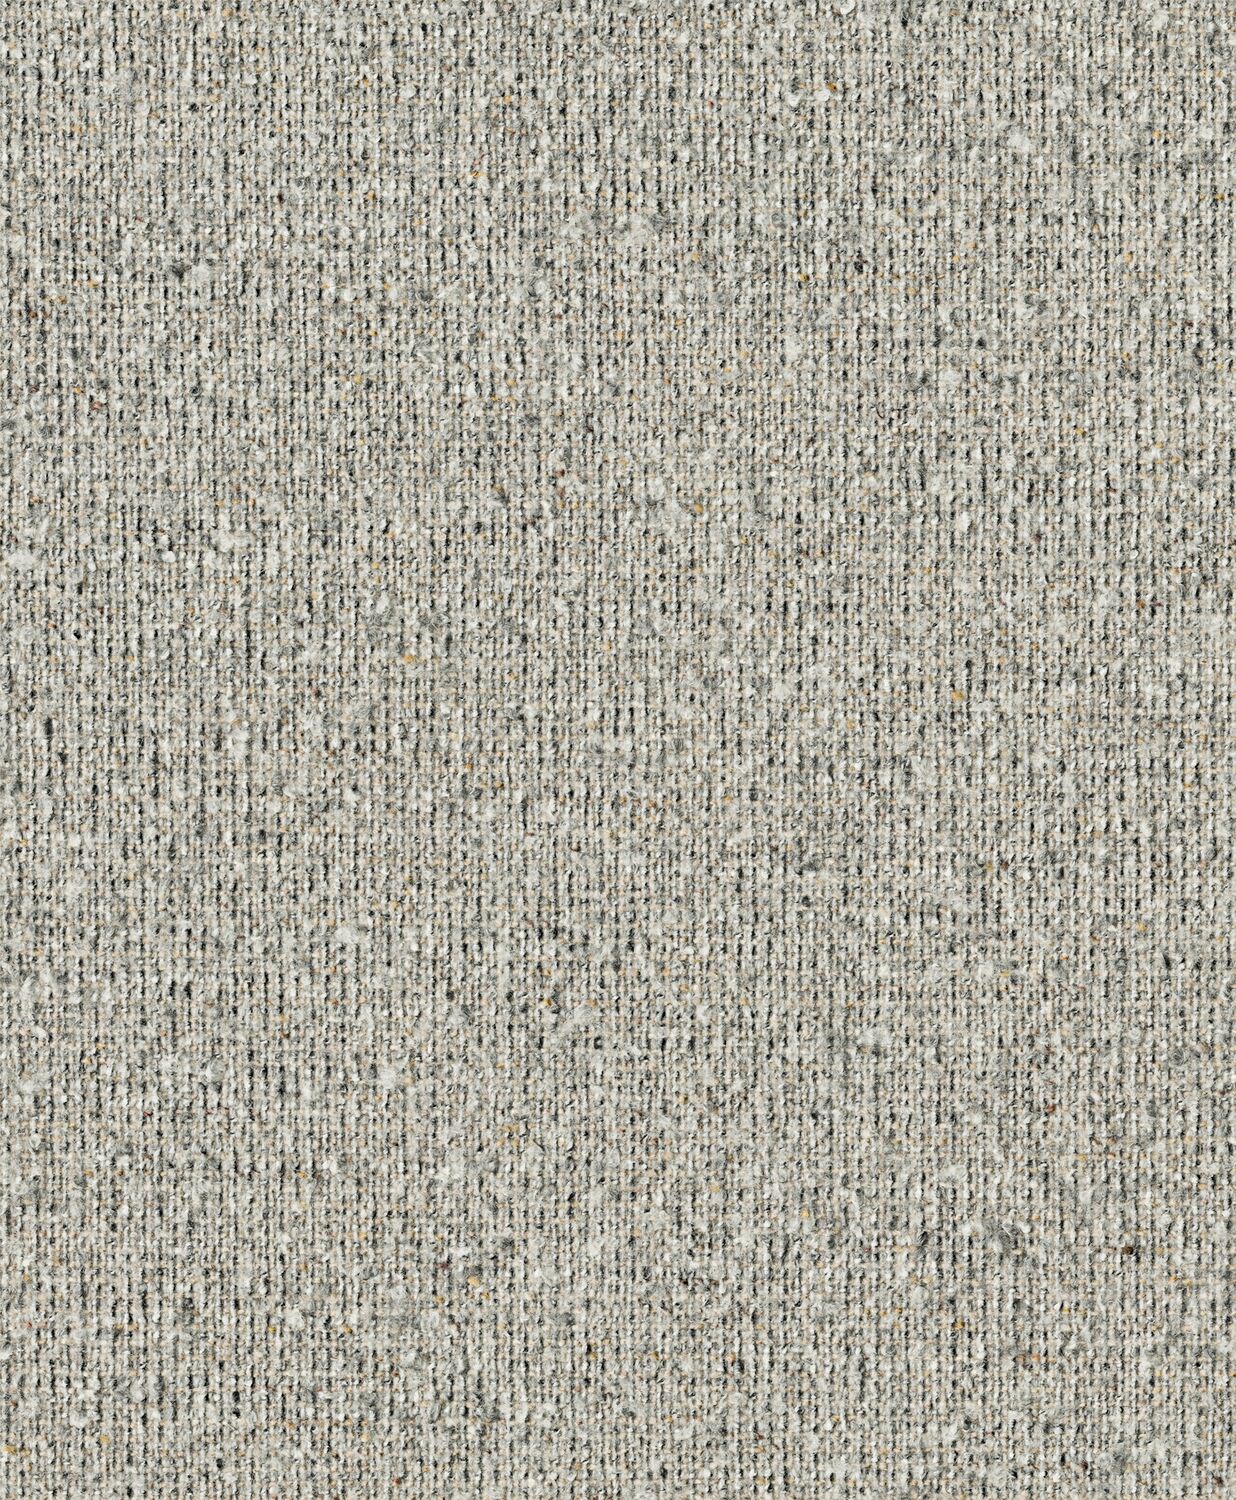 Everyday Boucle - Silver Aster - 4111 - 04 - Half Yard Tileable Swatches